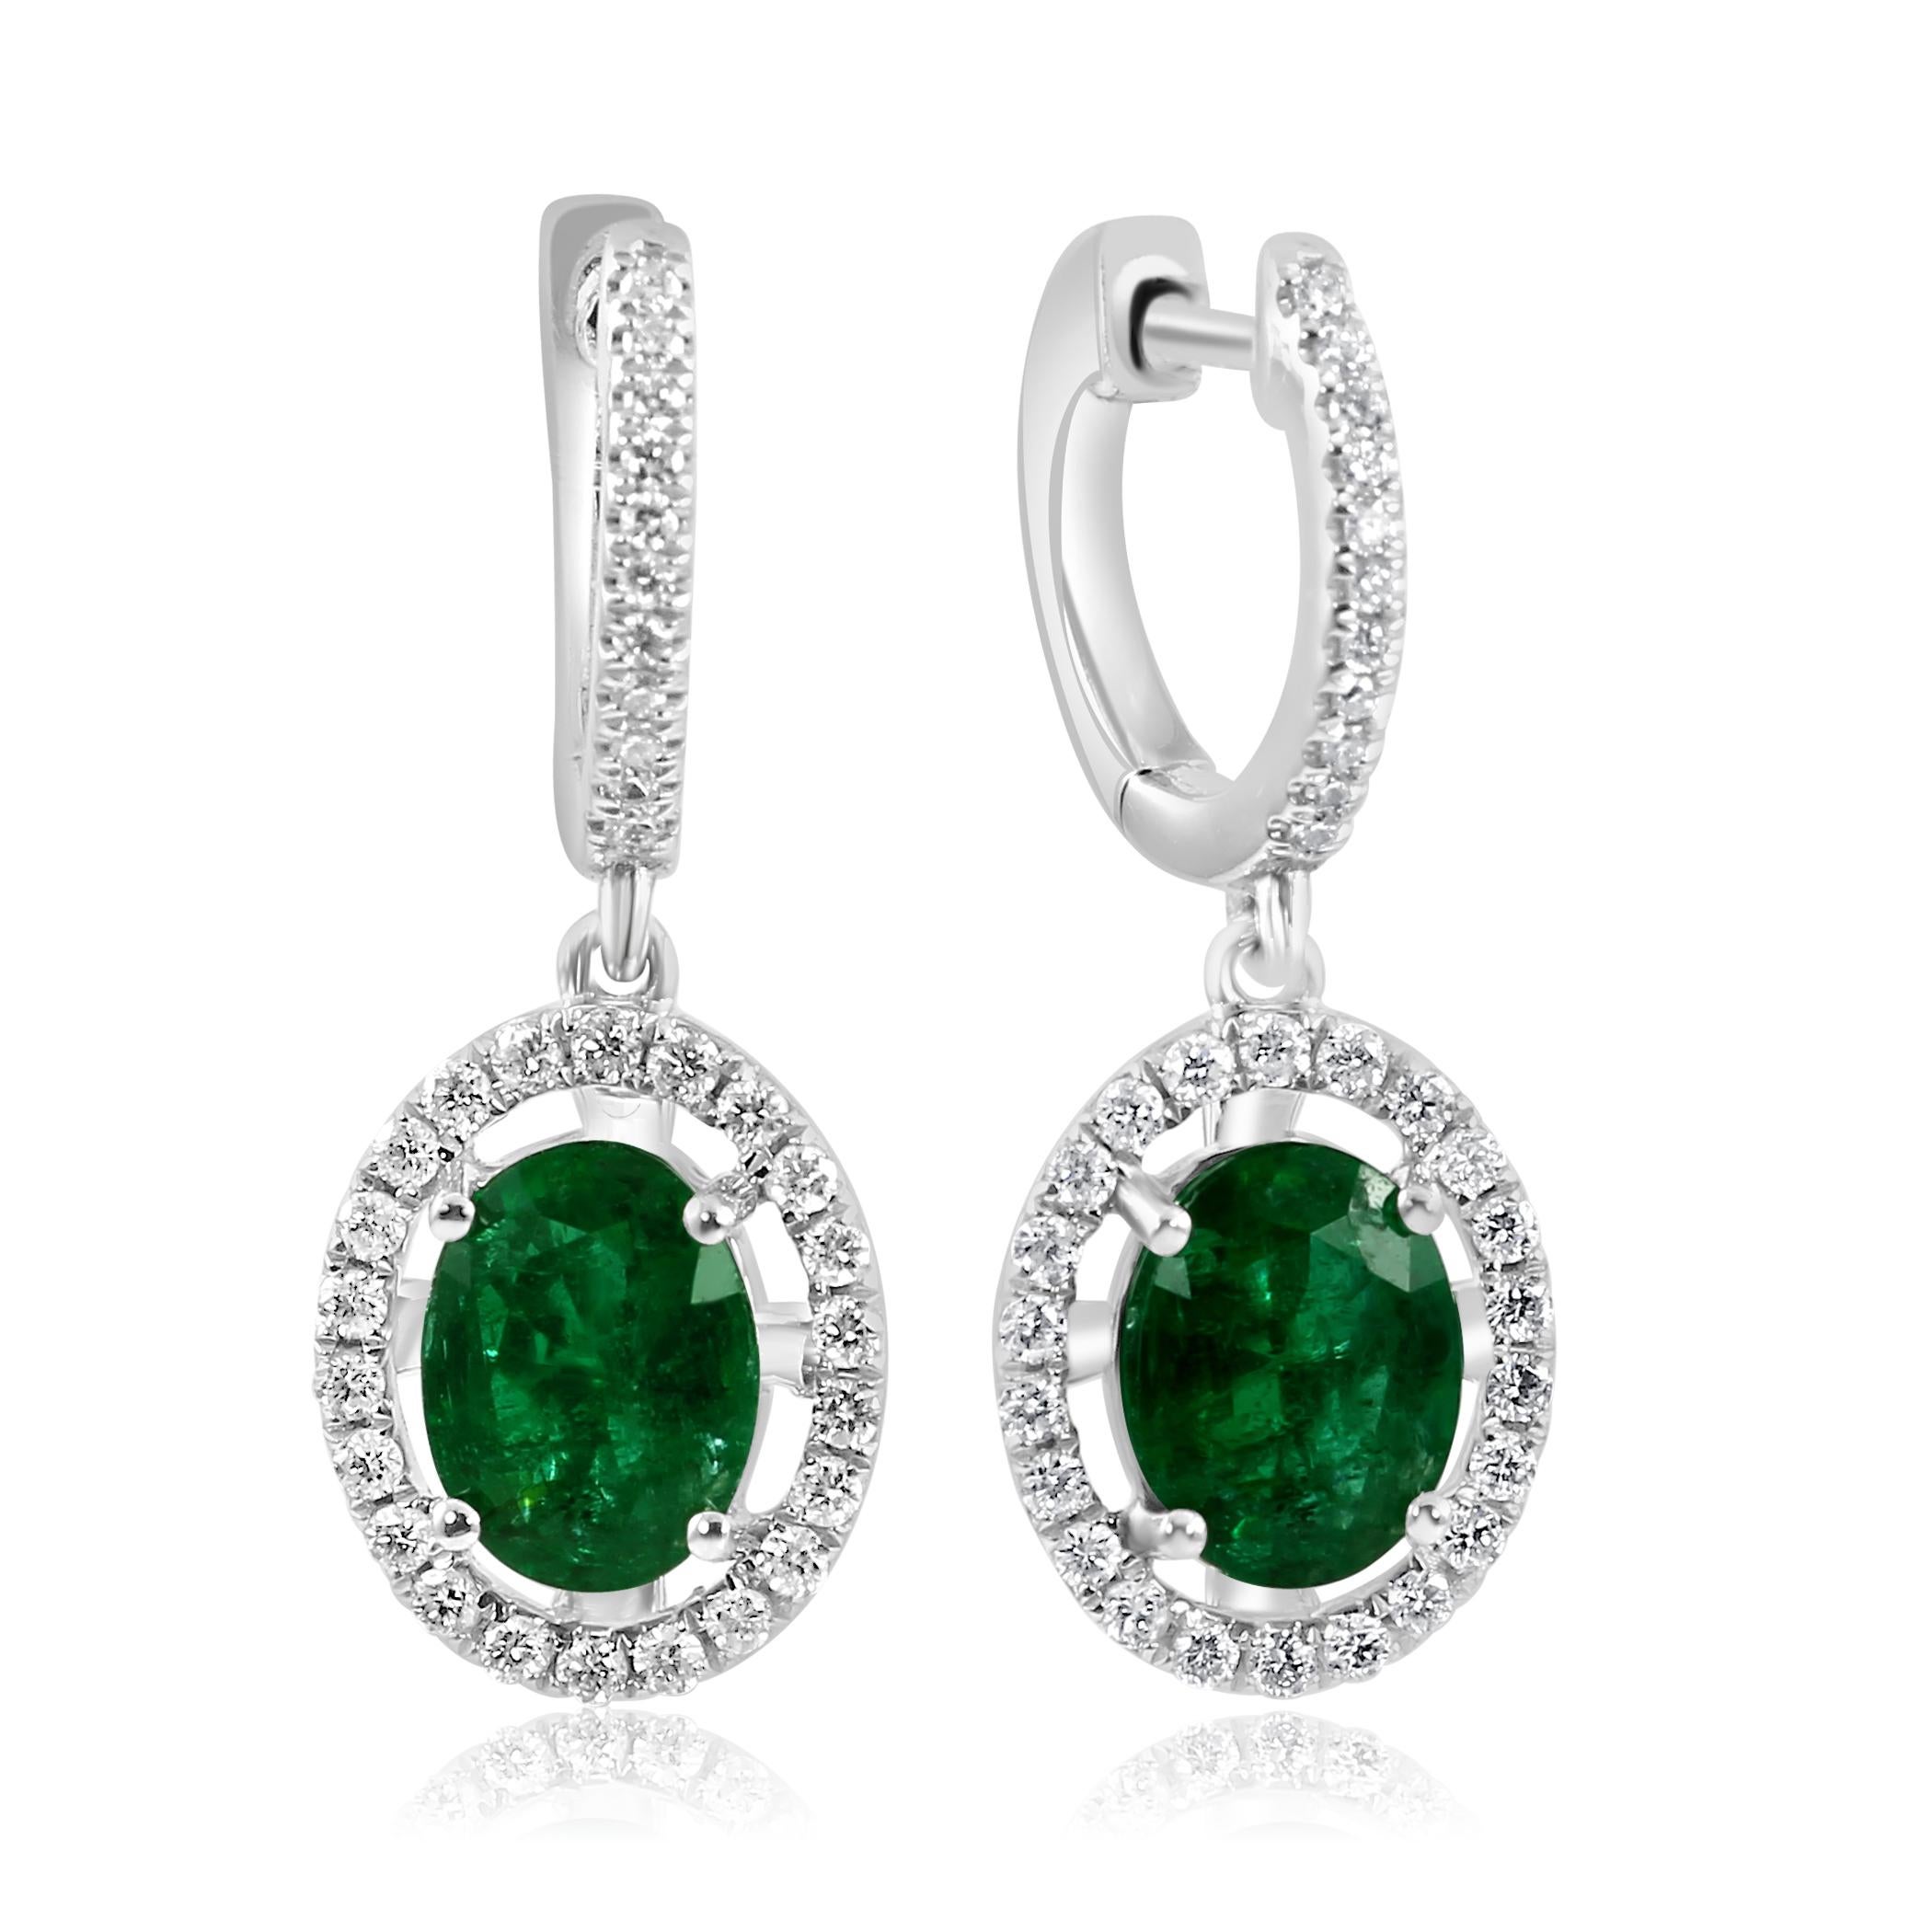 This beautiful pair of earrings embodies elegance and luxury, marrying the timeless allure of emeralds with the brilliance of white diamonds in a design that is both captivating and unforgettable.

The centerpiece of each earring is a mesmerizing